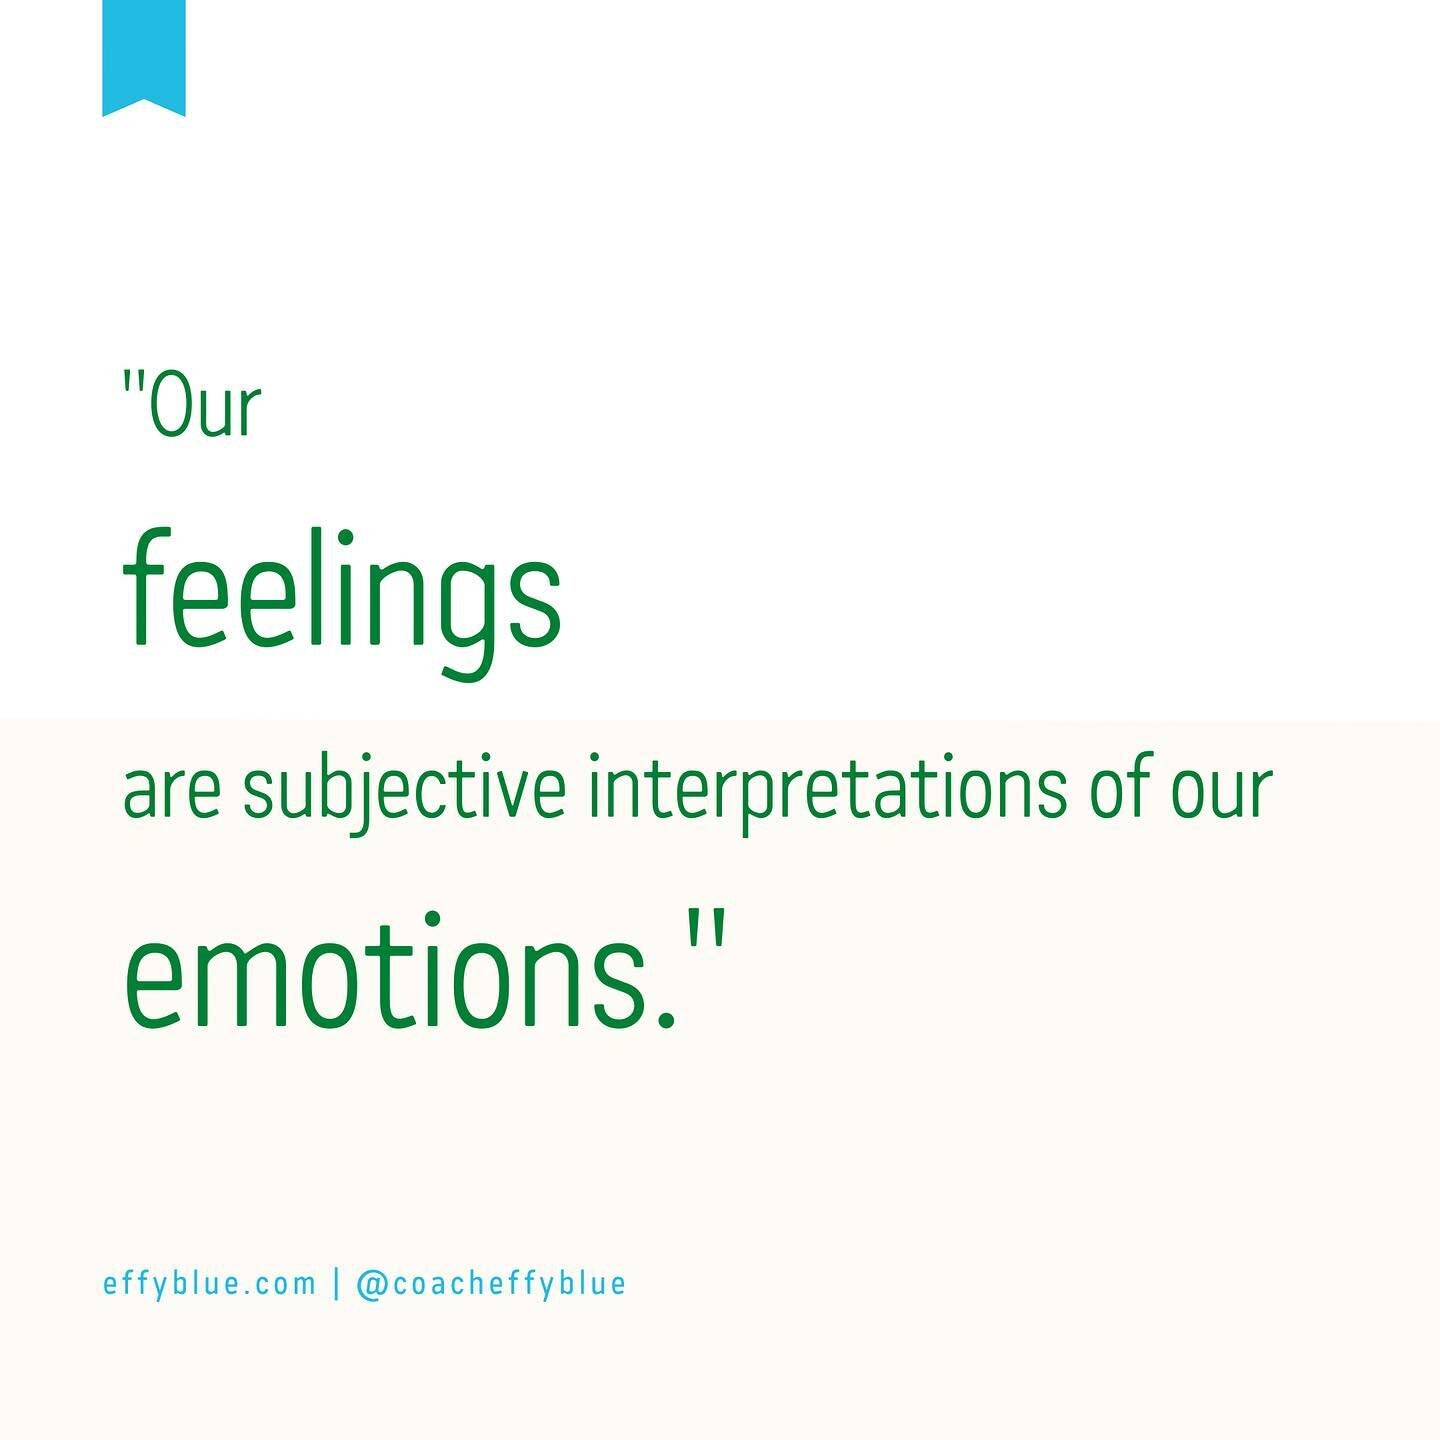 Although often we use the words &ldquo;emotions&rdquo; and &ldquo;feelings&rdquo; interchangeably, they are not the same scientifically or linguistically. There is certainly an overlap, however it&rsquo;s in their distinction that we can gain a deepe